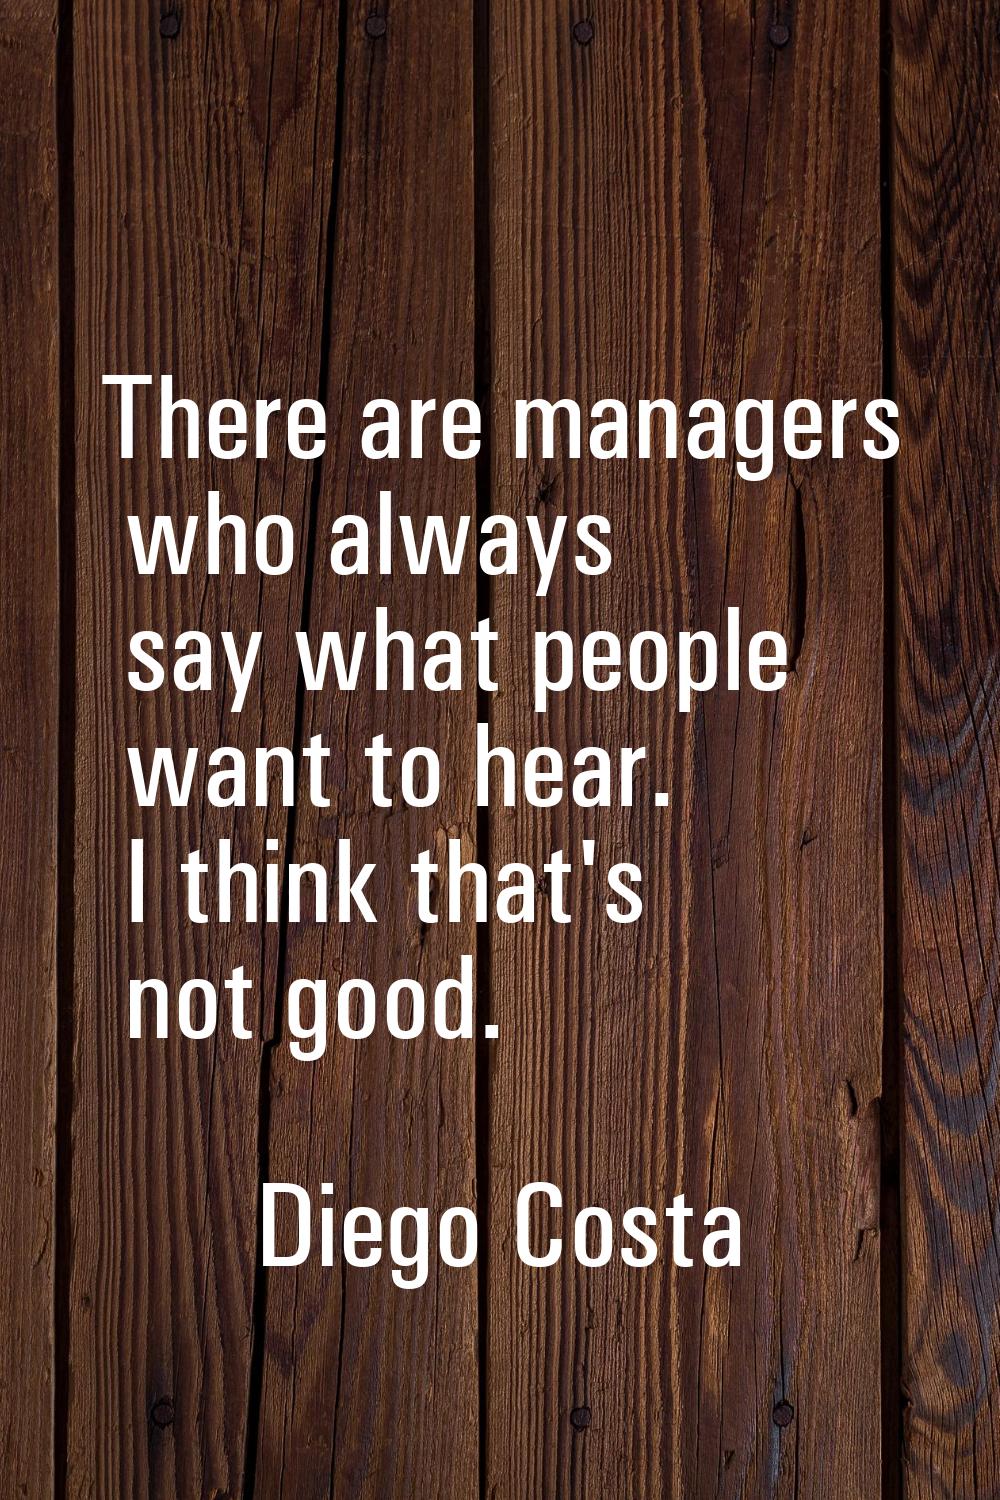 There are managers who always say what people want to hear. I think that's not good.